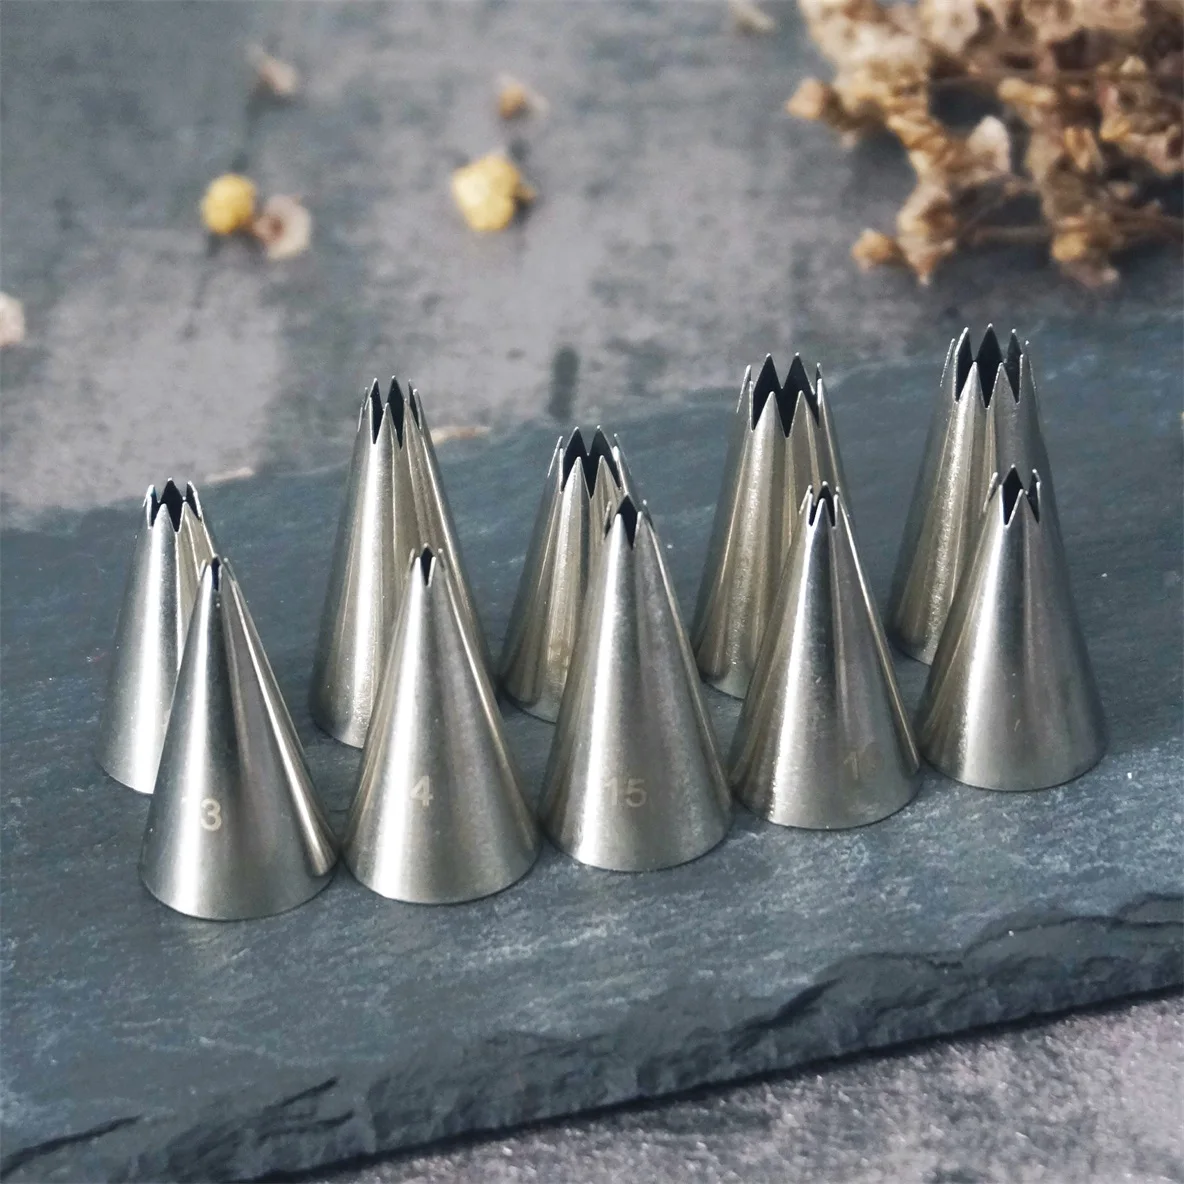 

#14-22 Open Star Icing Nozzle Stainless Steel Small Size Piping Tip Cake Decorating Tips Royal Icing Pastry Tip Tools Bakeware